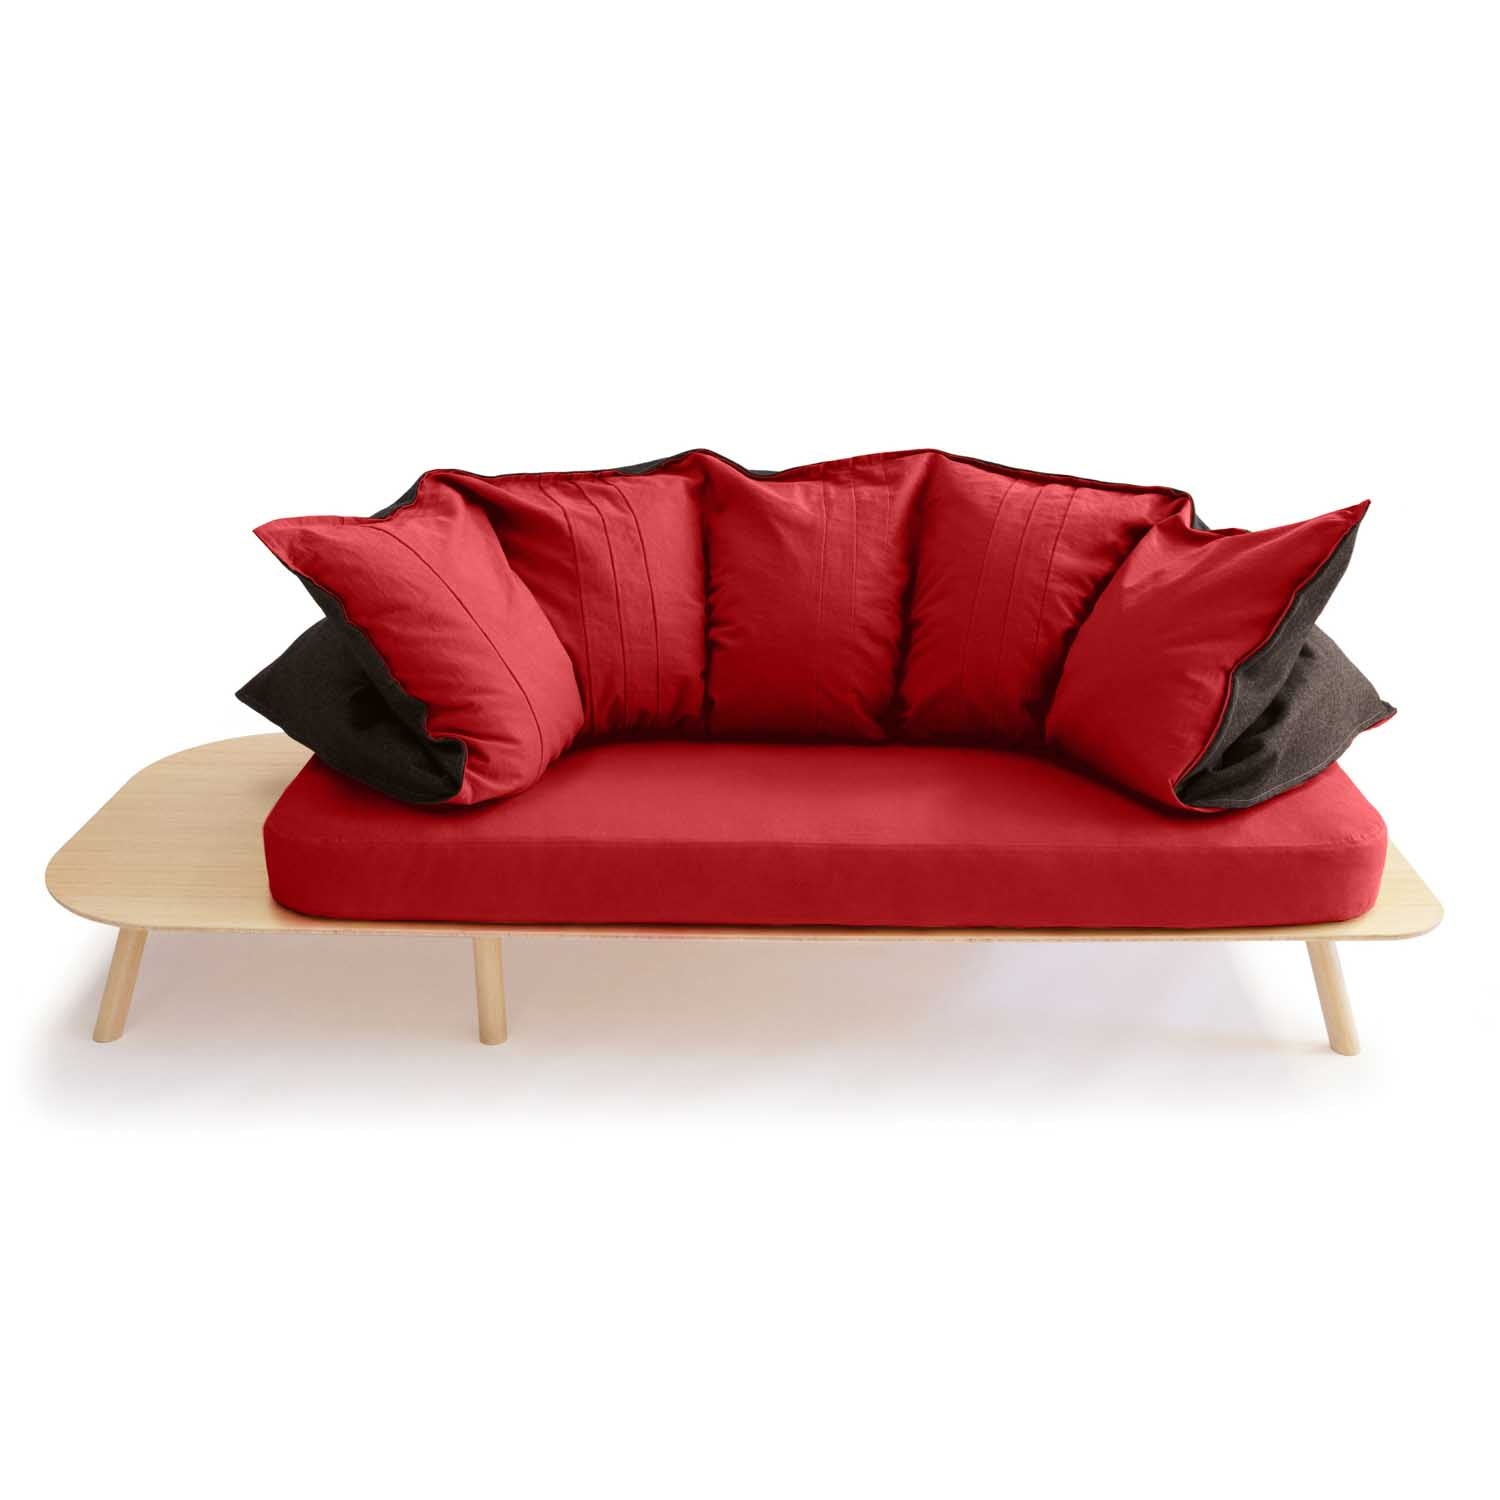 Multi-Functional and Practical Lifestyle.red sofa bed.